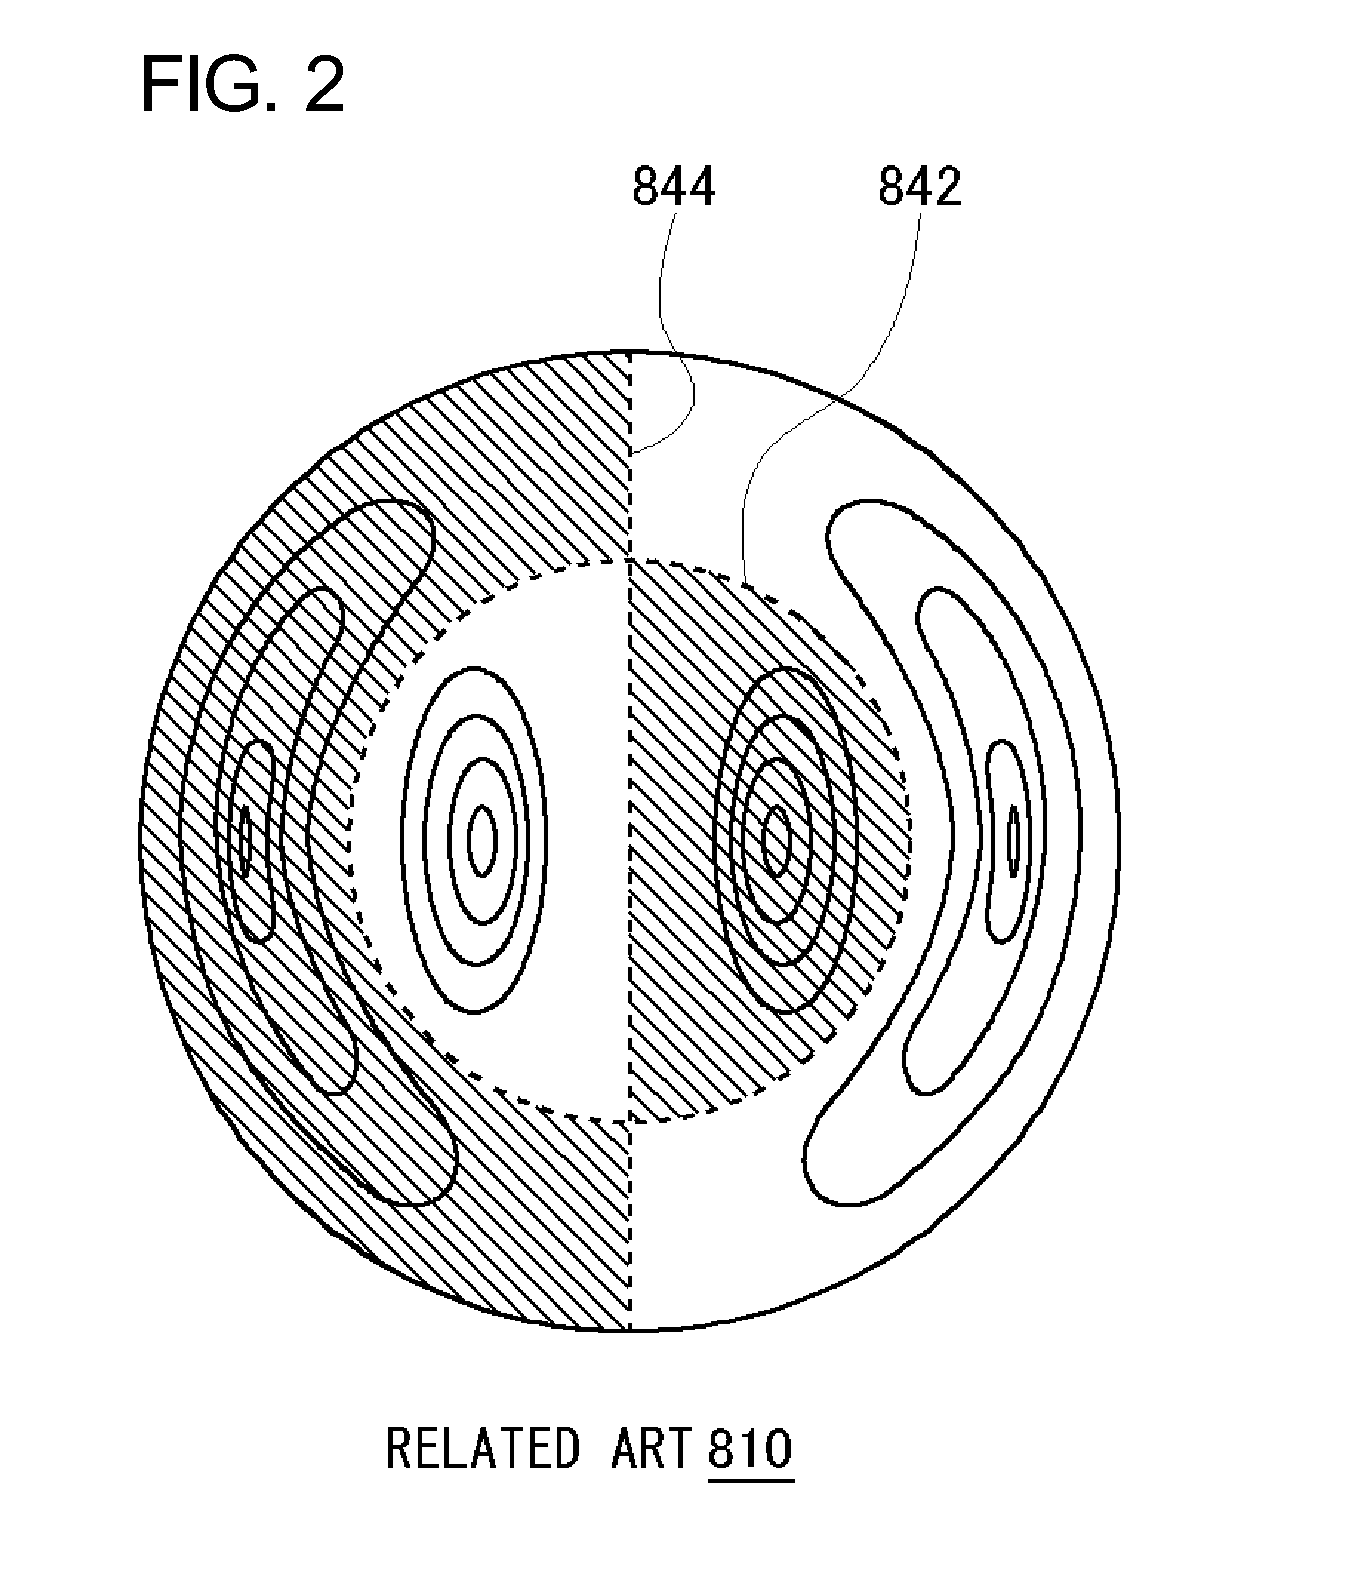 Disk drive device